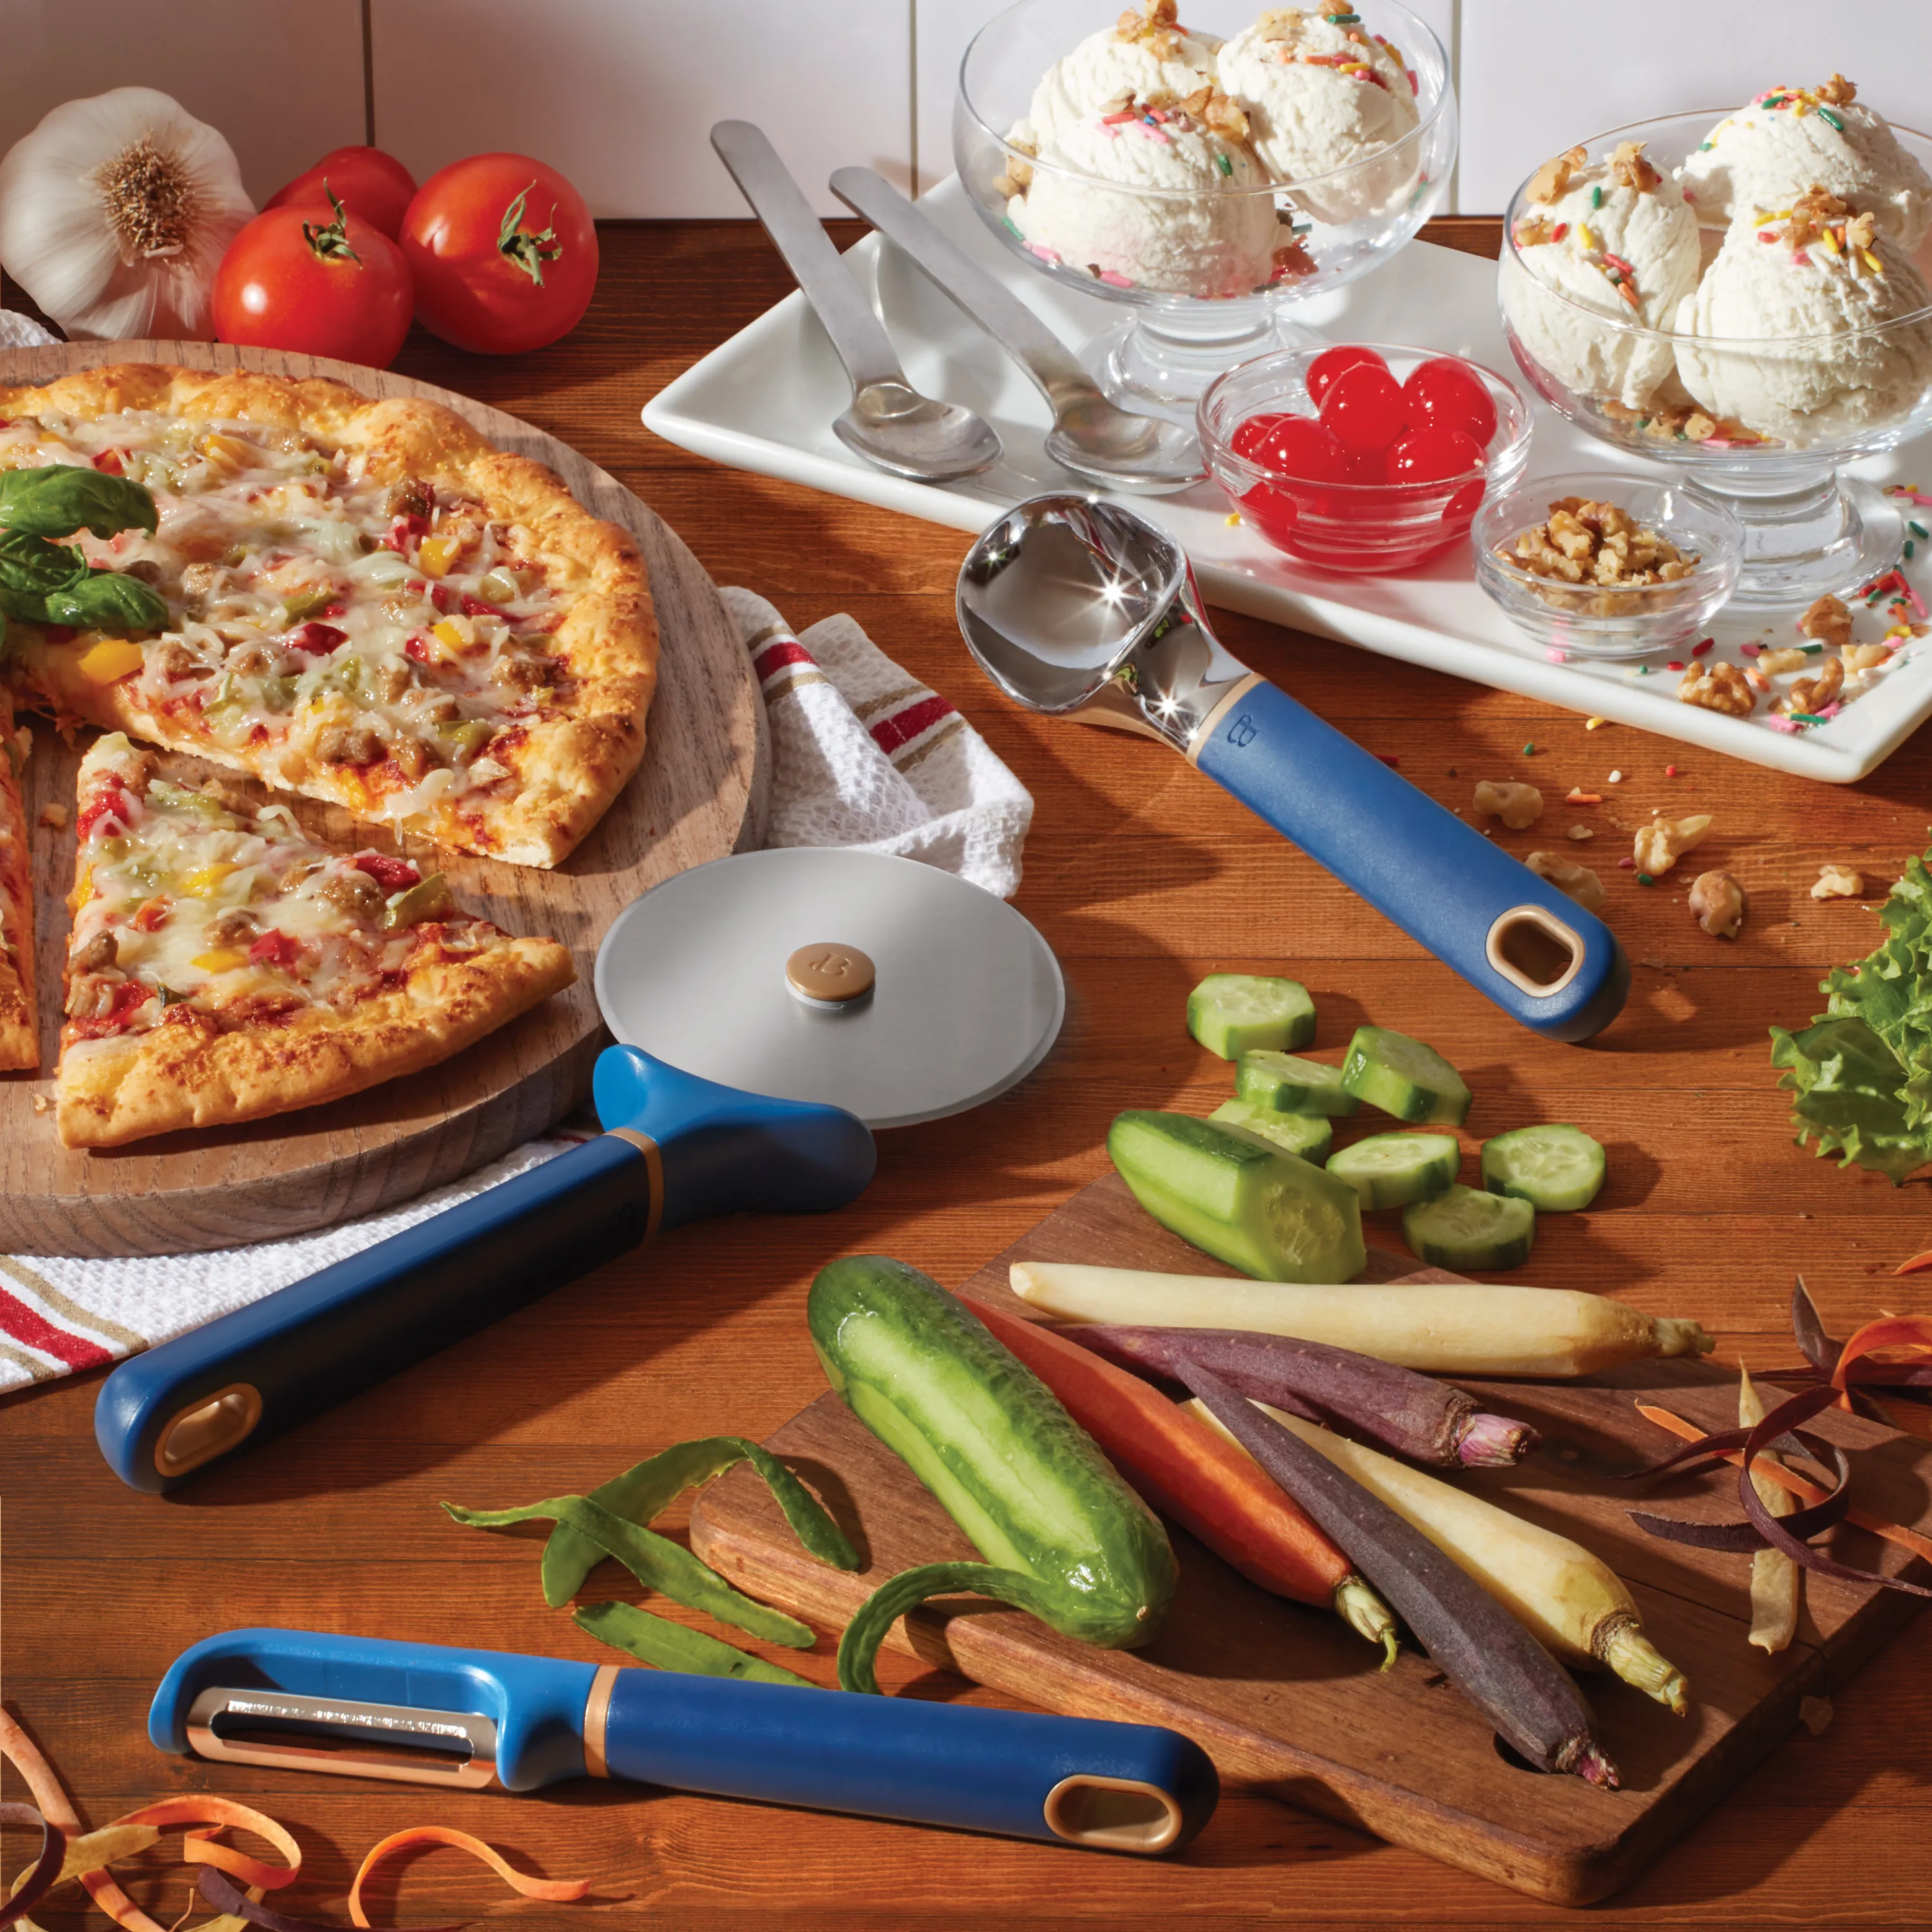 

Ice Cream Scoop, Pizza Cutter, and Peeler in Blueberry Pie by Drew Barrymore